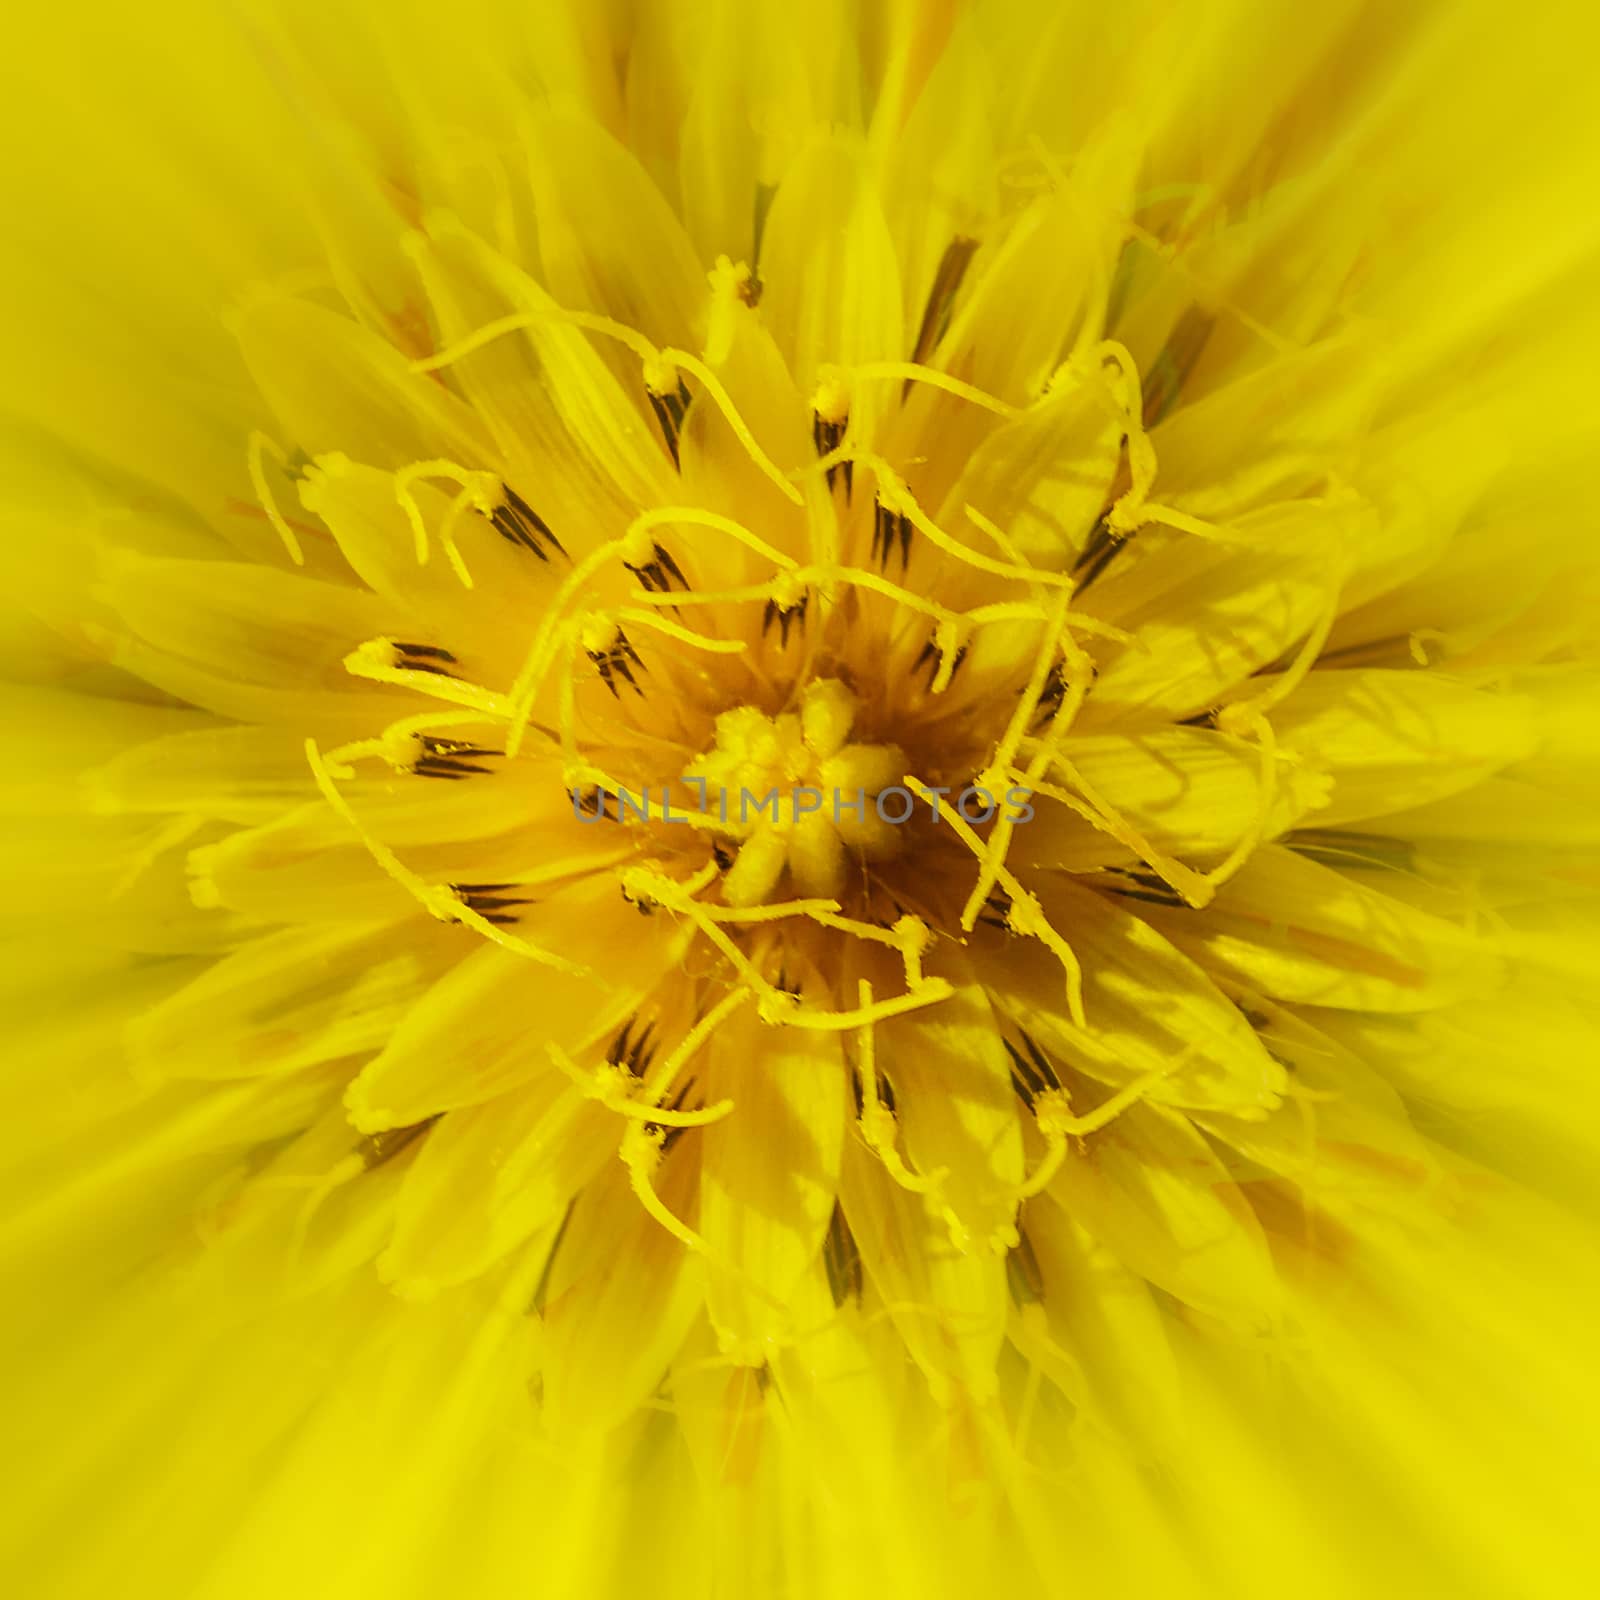 Abstract background, yellow flower extreme close up